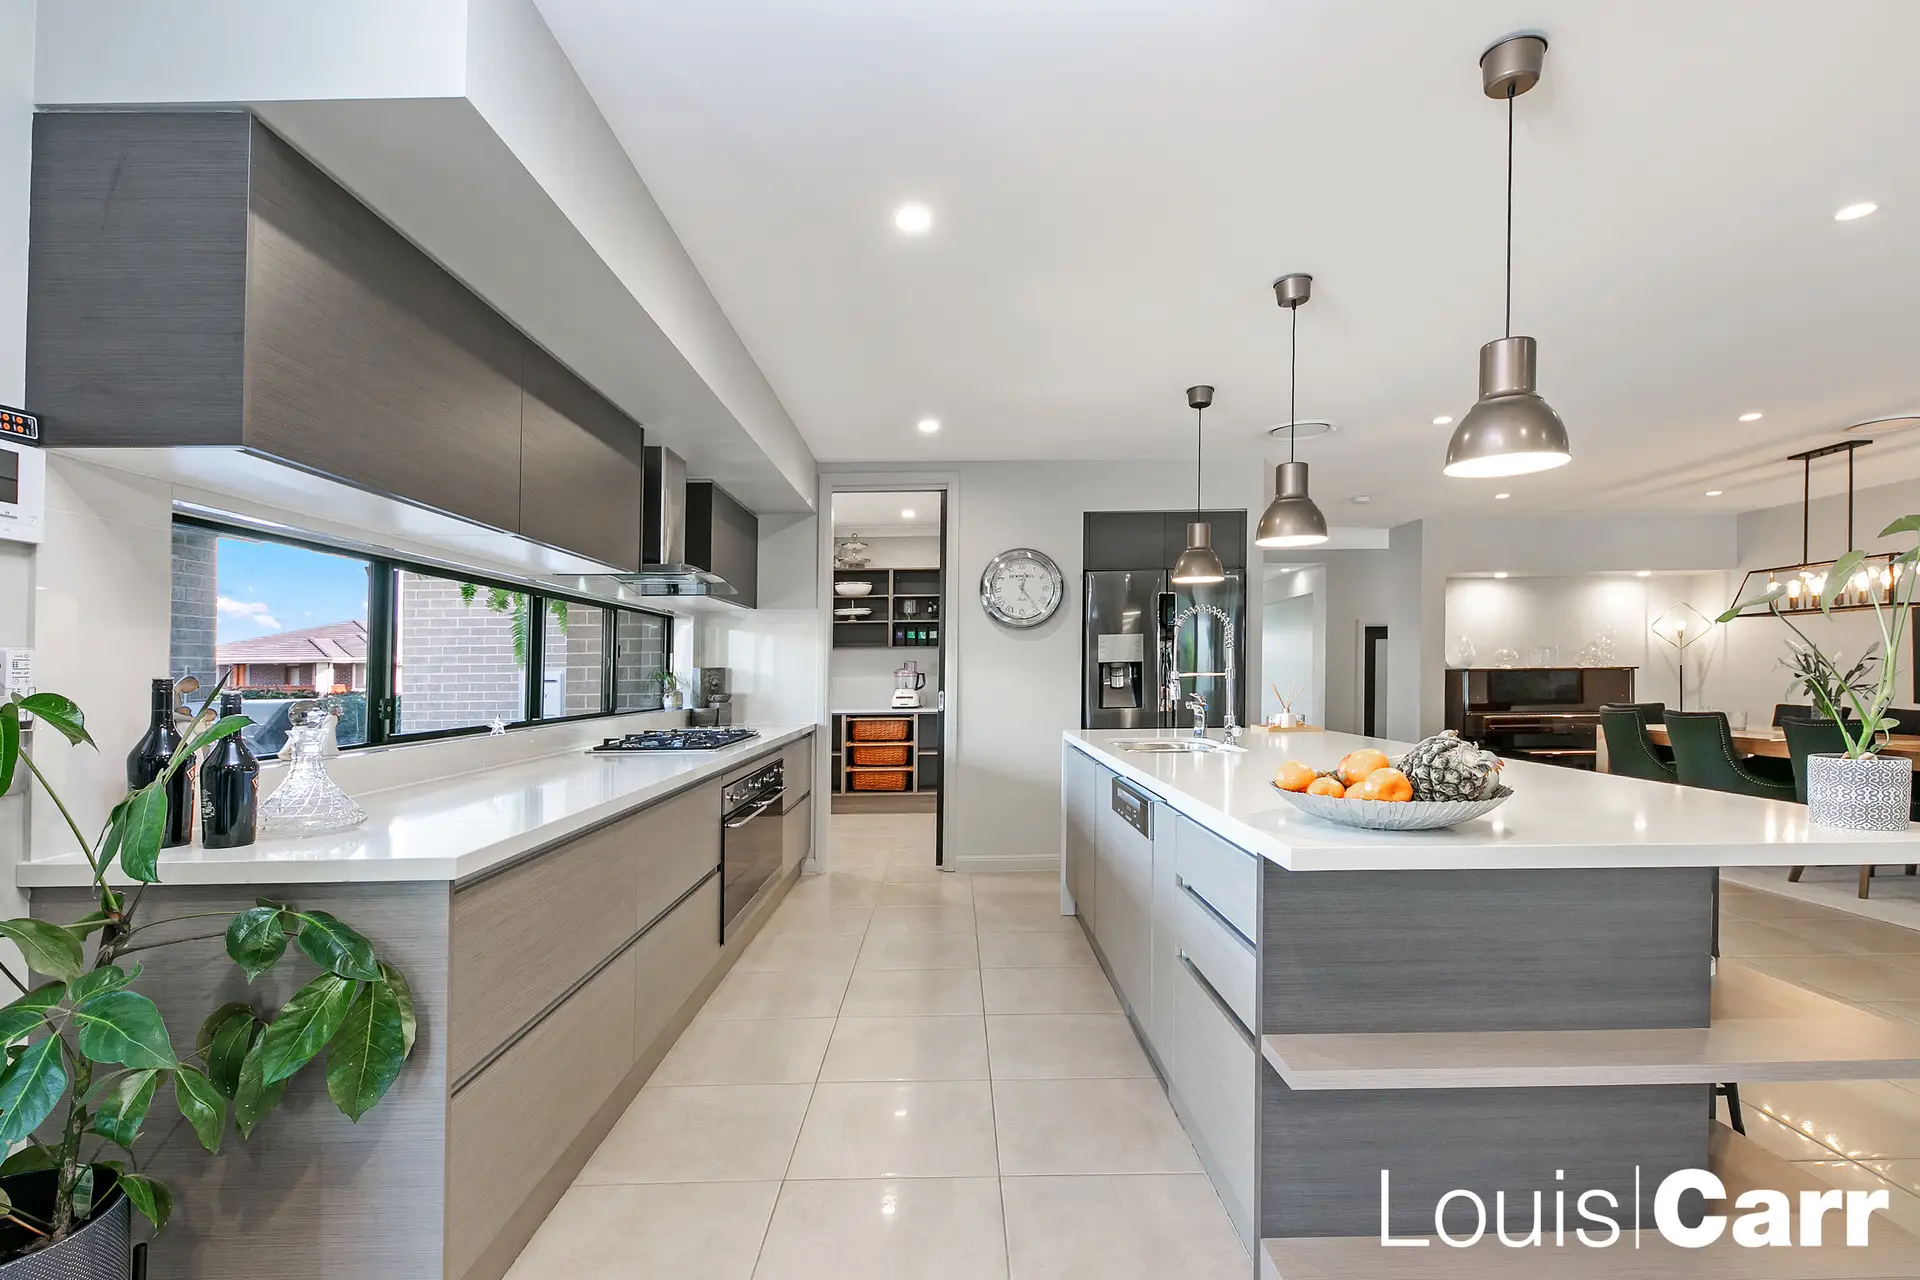 Photo #2: 11 Stynes Avenue, North Kellyville - Sold by Louis Carr Real Estate